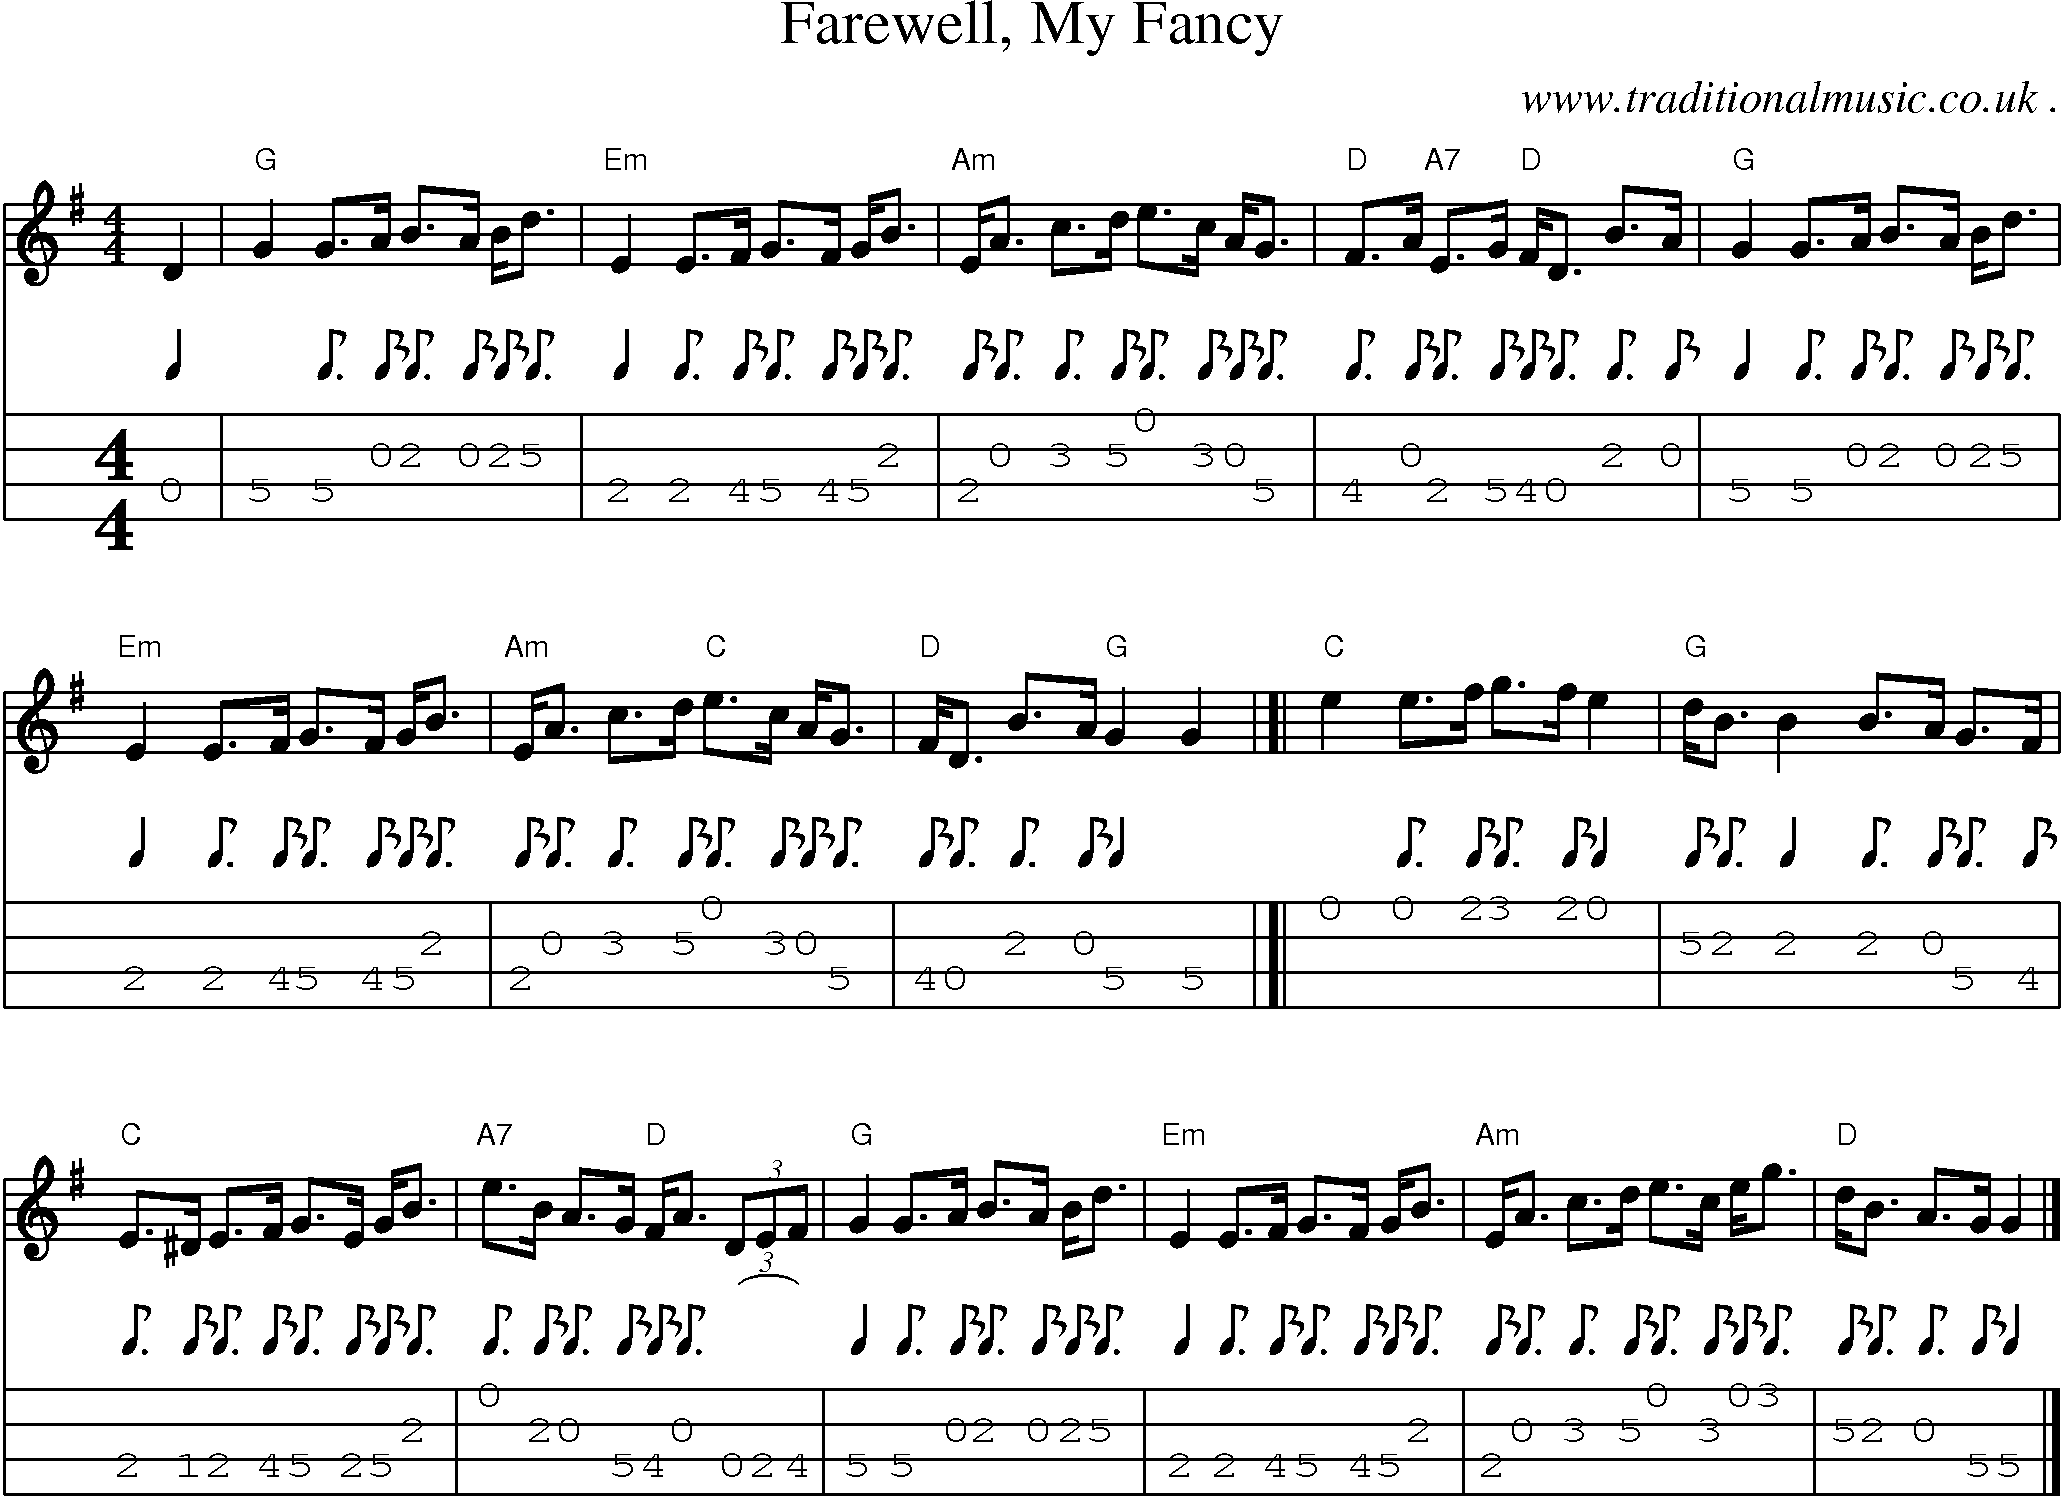 Sheet-music  score, Chords and Mandolin Tabs for Farewell My Fancy